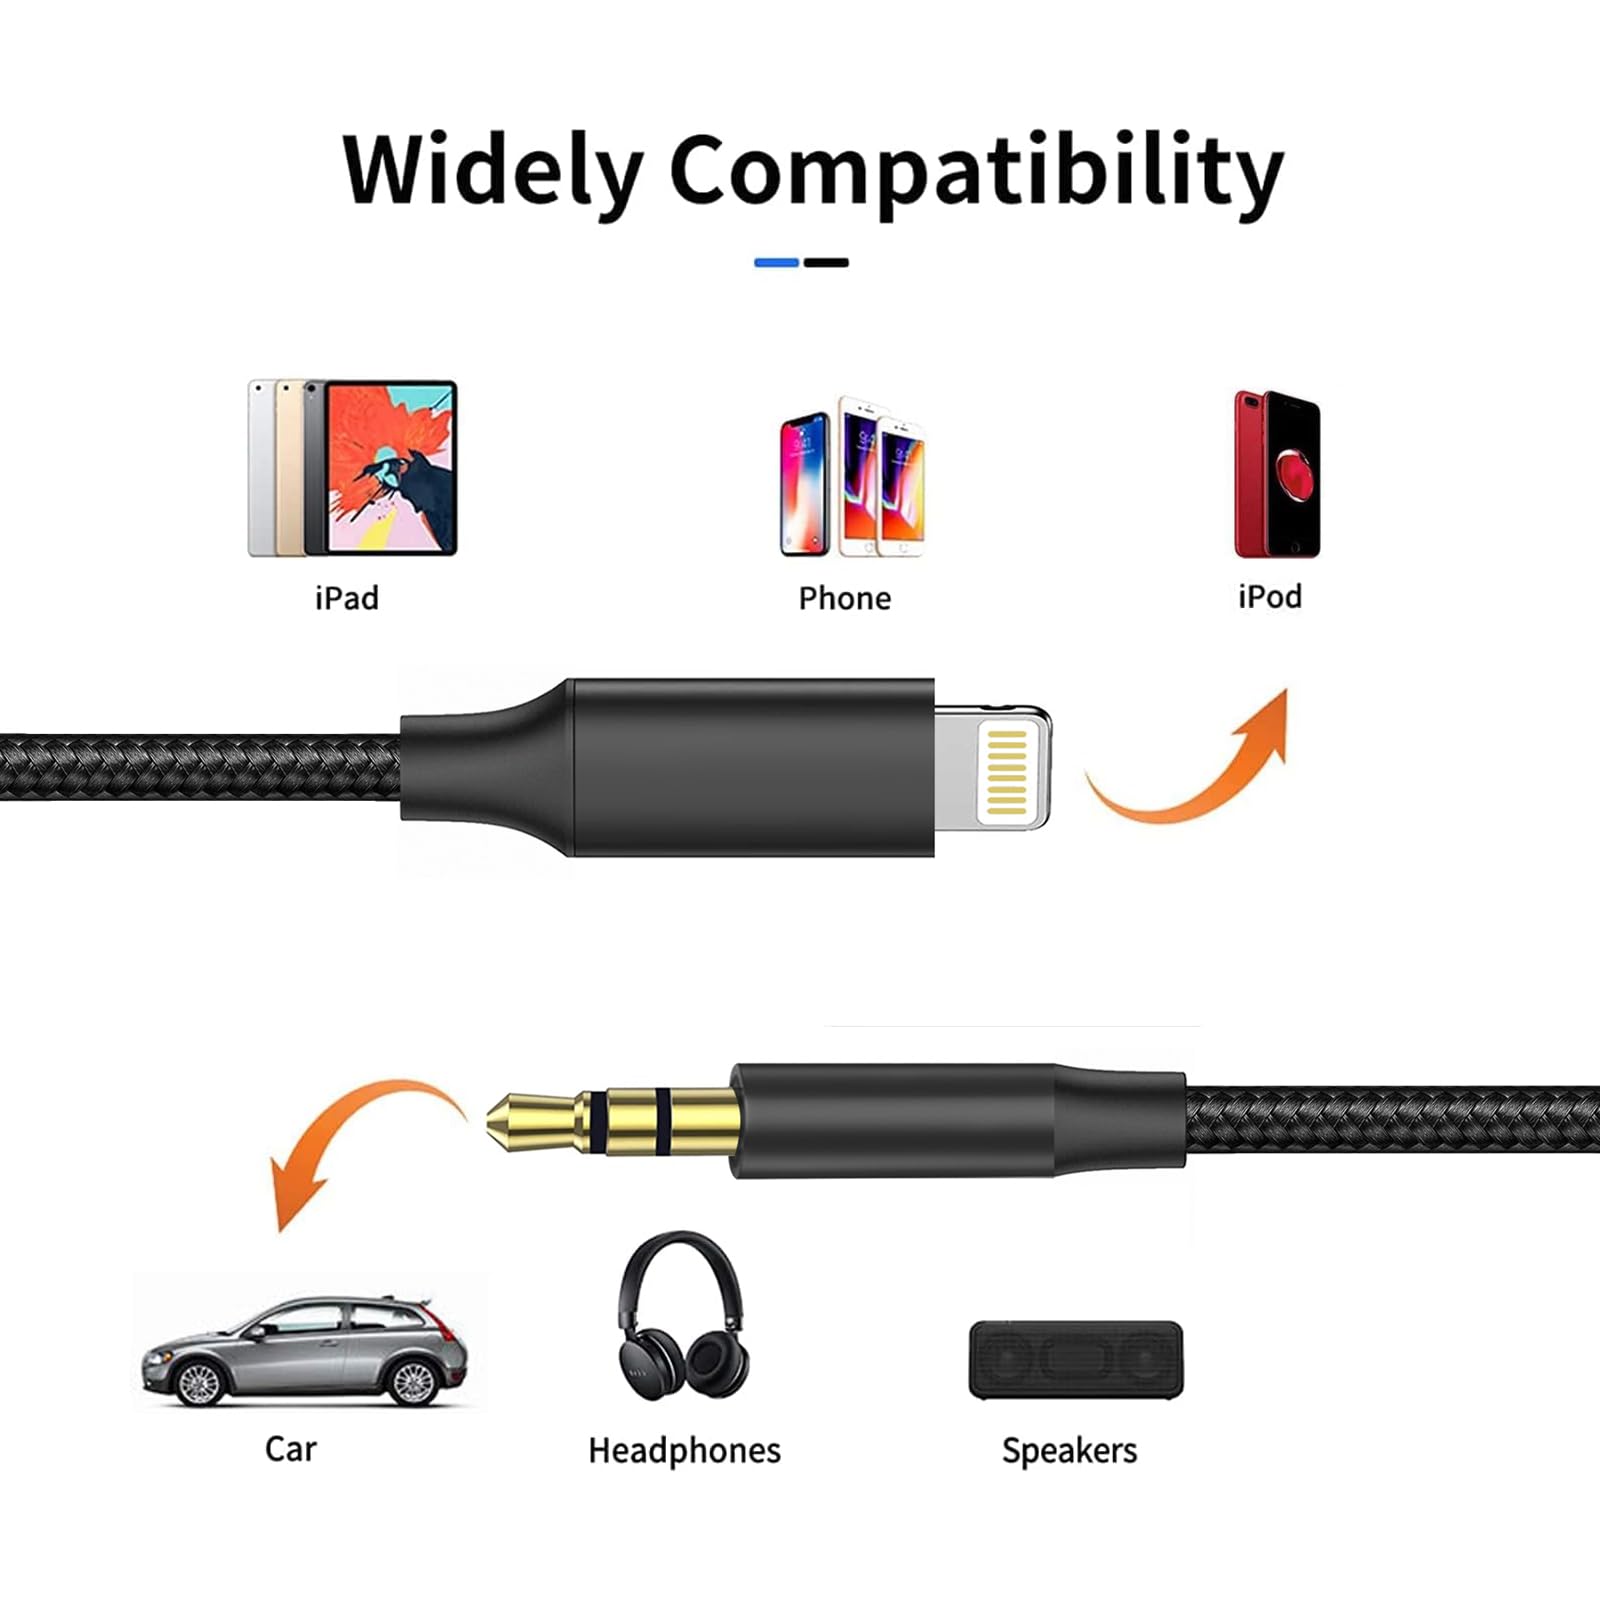 [Apple MFi Certified] iPhone AUX Cord for iPhone - Lightning to 3.5mm Aux Stereo Audio Cable Adapter Compatible with iPhone 14/13/12/11/XR/X/8/7 for Car,Speaker,Headphone Jack, 3.3ft Black